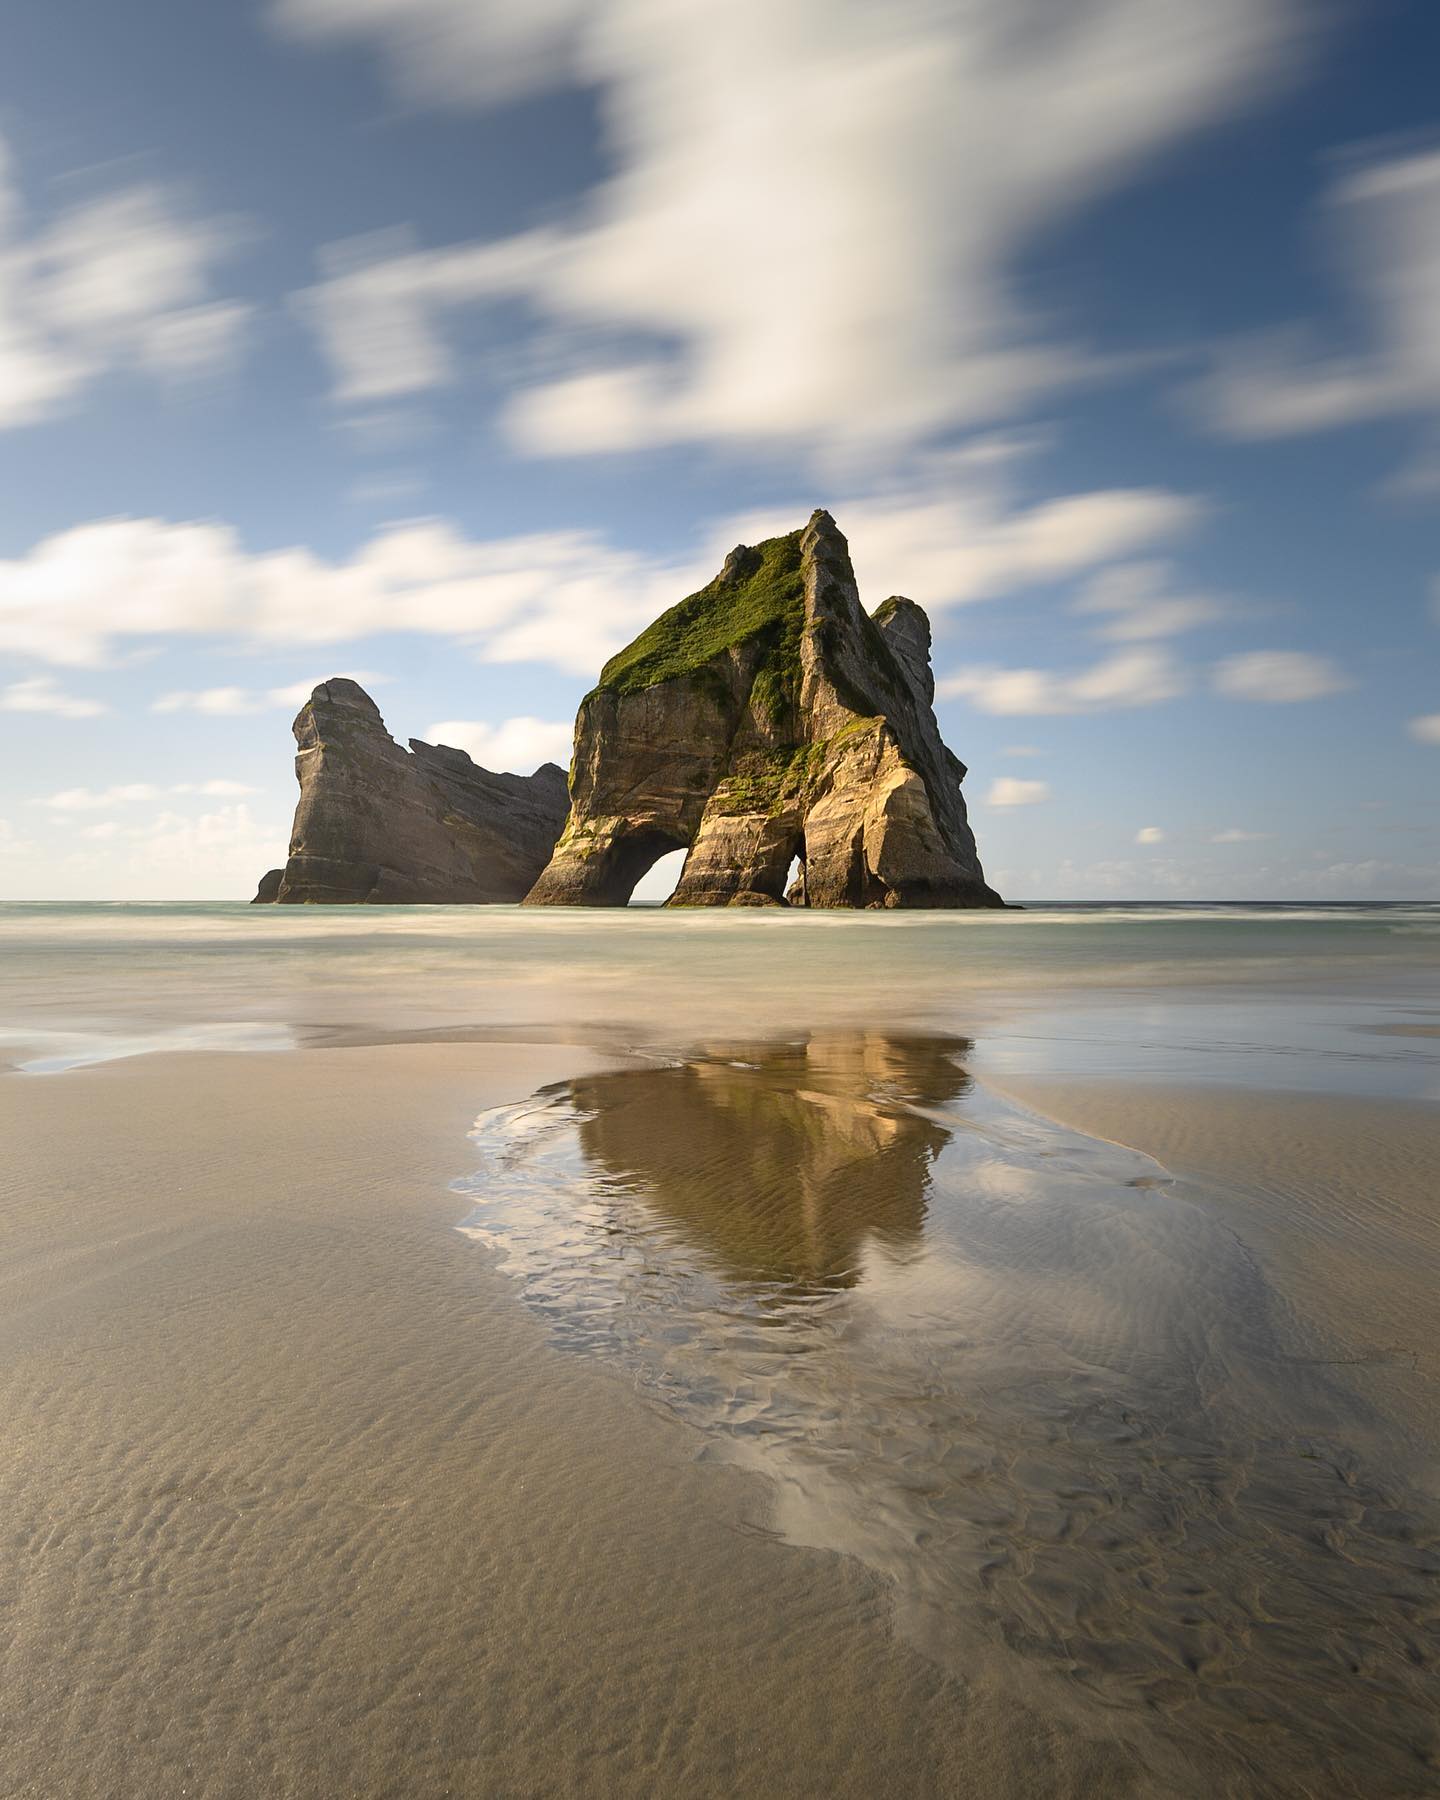 Wharariki Beach and its Archway Islands are definitely worth the long drive and the remoteness. Add to that the relentless wind & waves, the caves, the sand dunes, the wildlife and the gigantic jagged rocks - no wonder this place features among the Windows 10 wallpapers 🌅
.
.
.
.
.
#whararikibeach #nz #tasman #tasmansea #wharariki #nzsouthisland #purenewzealand #purenz #puponga #discovernz #abeltasman #nzgeo #raw_australia_nz #realrawnz #nzmustdo #nzmustsee #nouvellezelande #nouvellezélande #nzroadtrip #nikonnz #bbcearth #newzealand #aotearoa #plagedereve #nzsummer #nztravel #nzphotographer #nzlife #longexposure